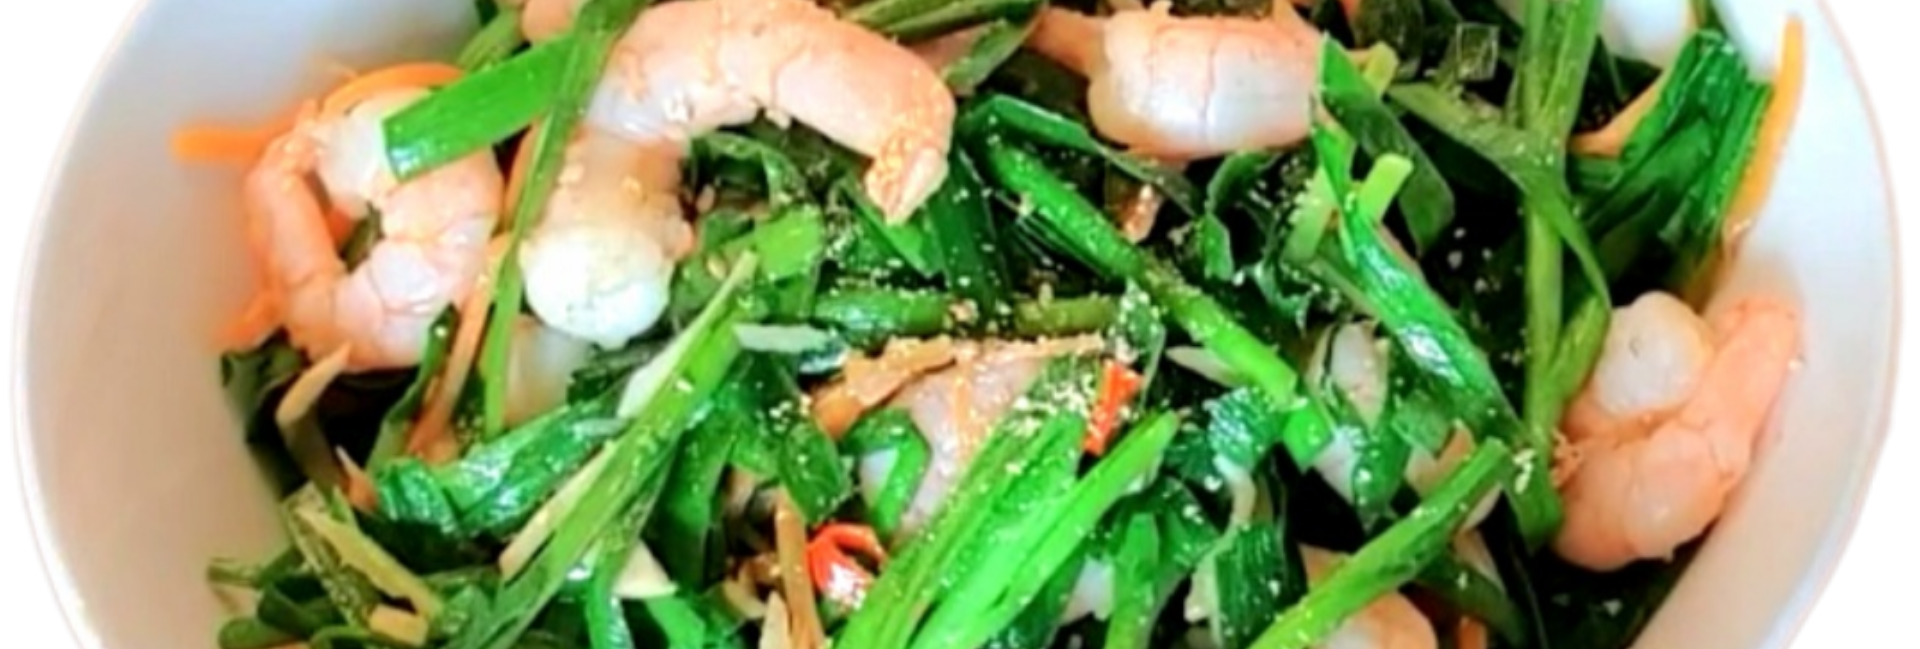 Lovely stir fry prawns with garlic chives ready to be served.